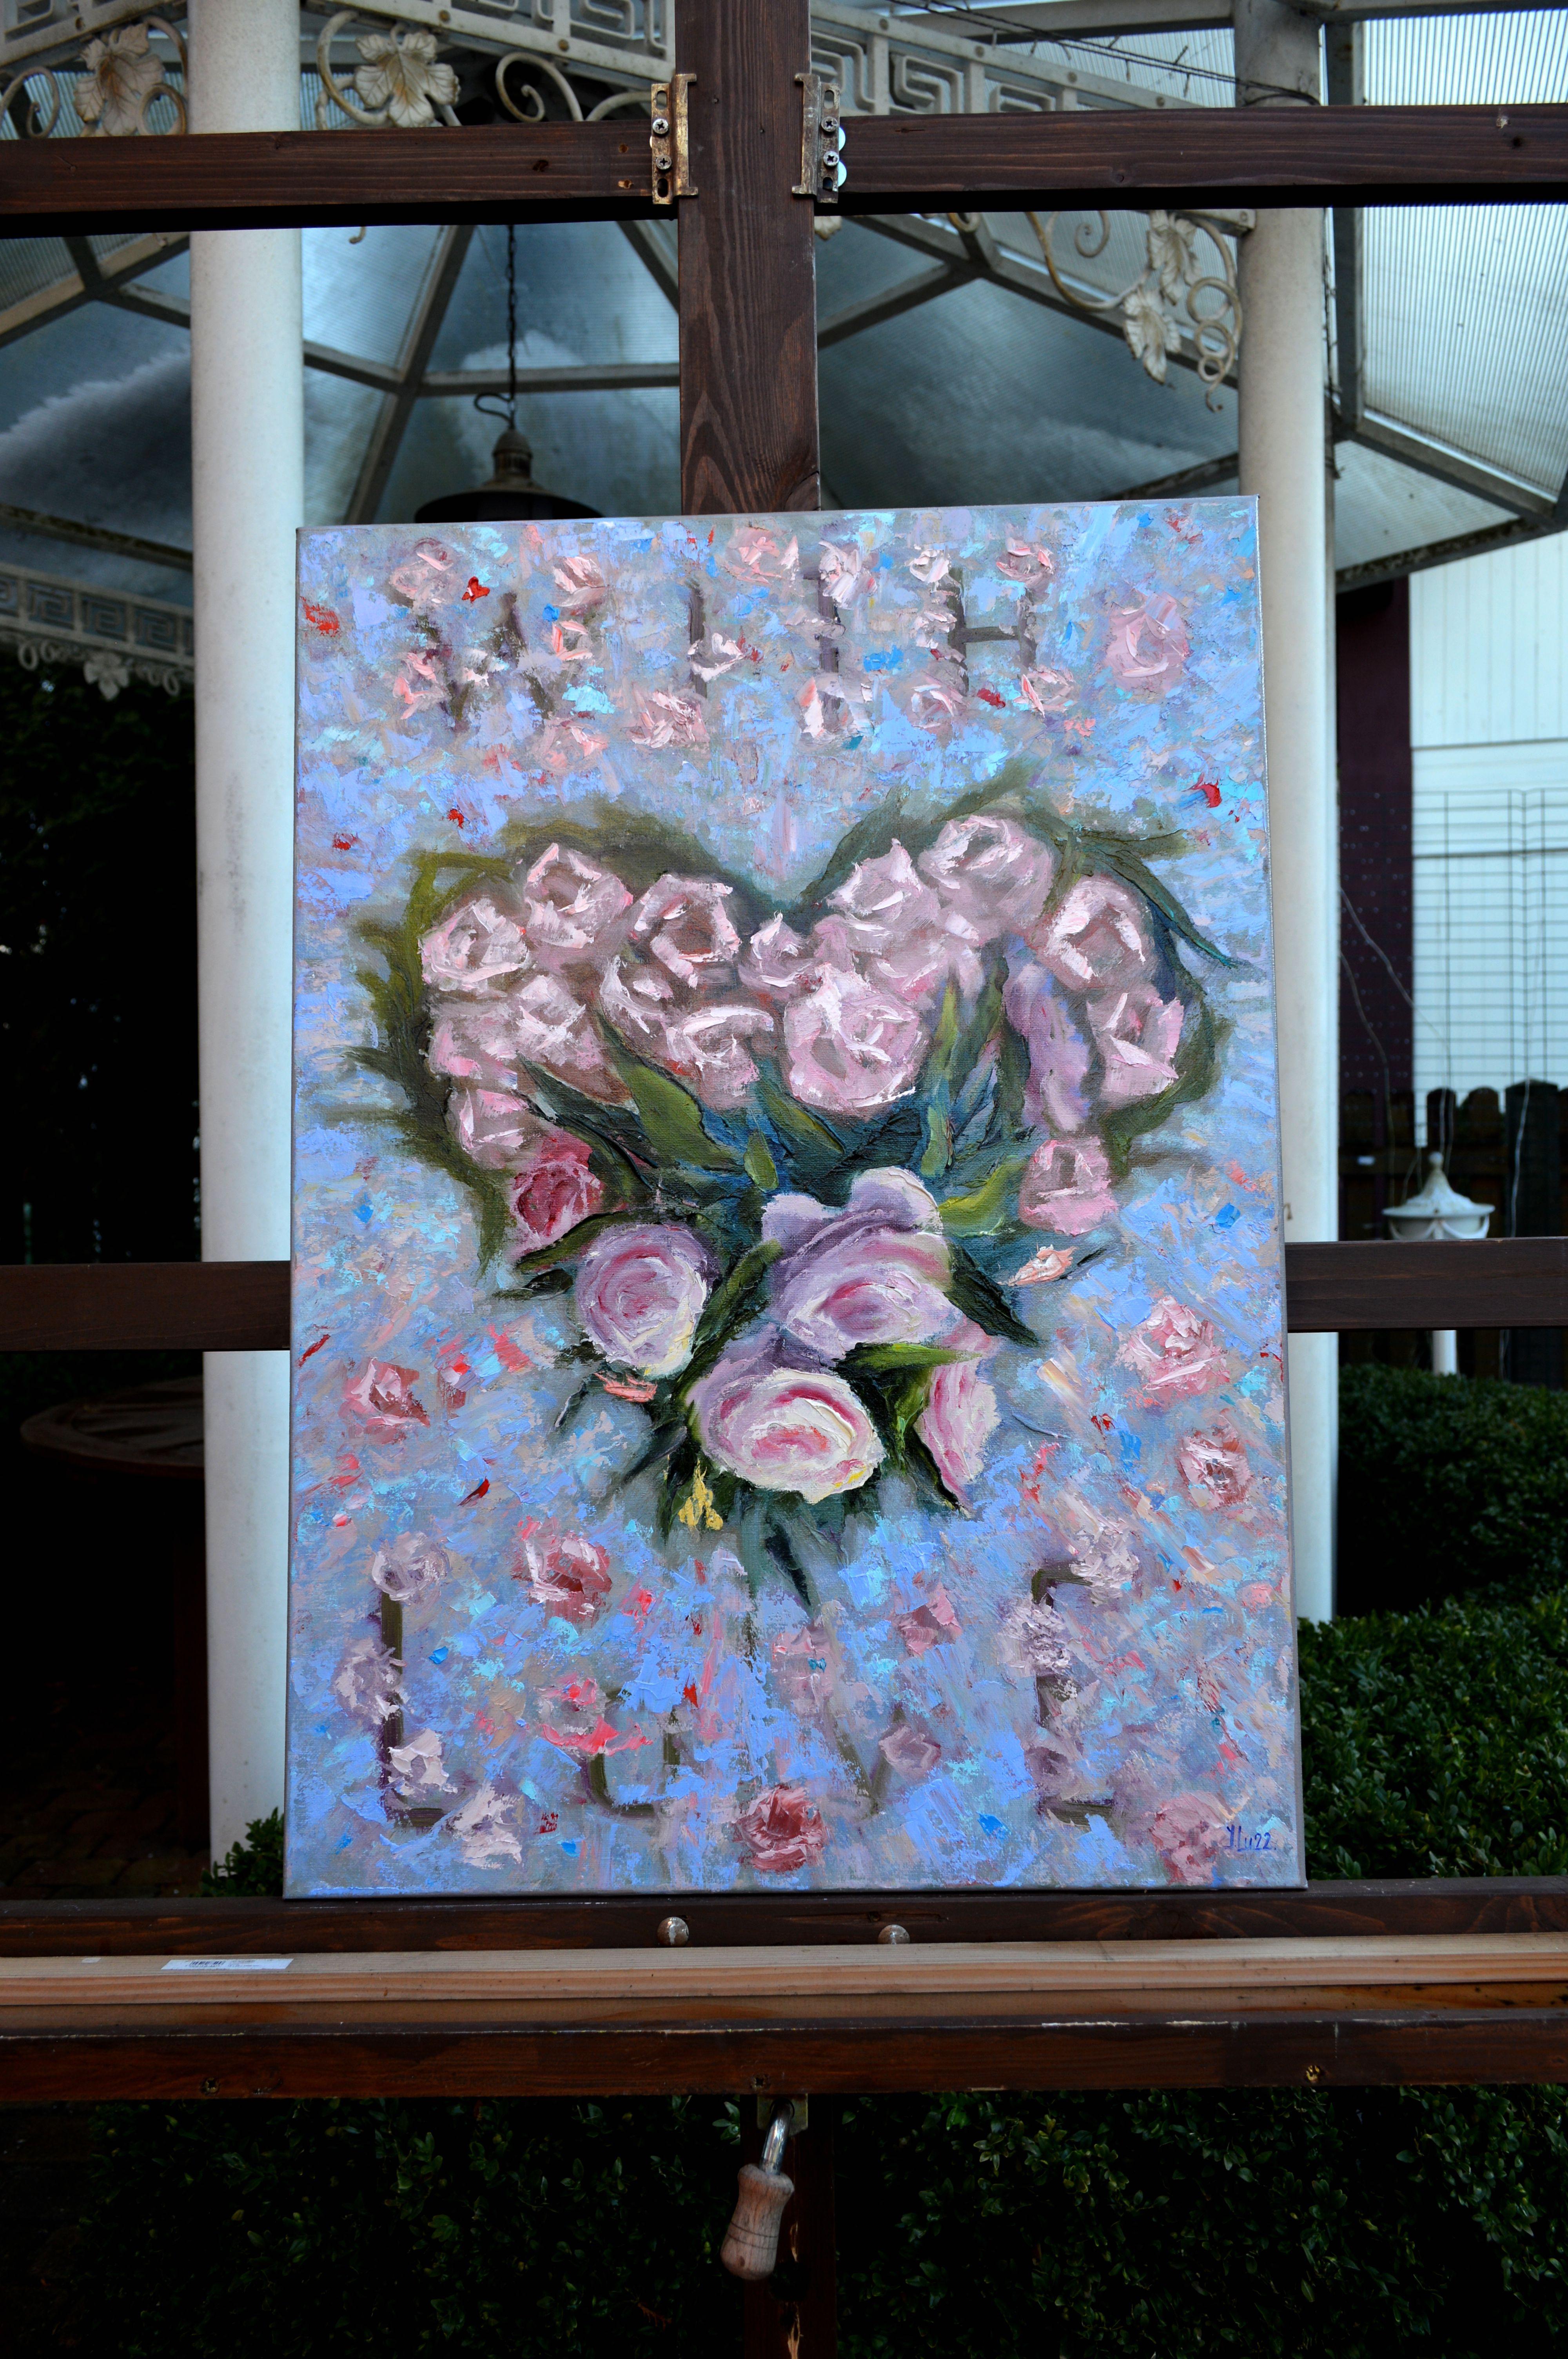 In this enchanting oil painting, I've captured the tender essence of love through a romantic bouquet of roses. Every stroke is infused with impassioned energy, embodying fine art and impressionistic flair. The symbolic heart shape formed by the